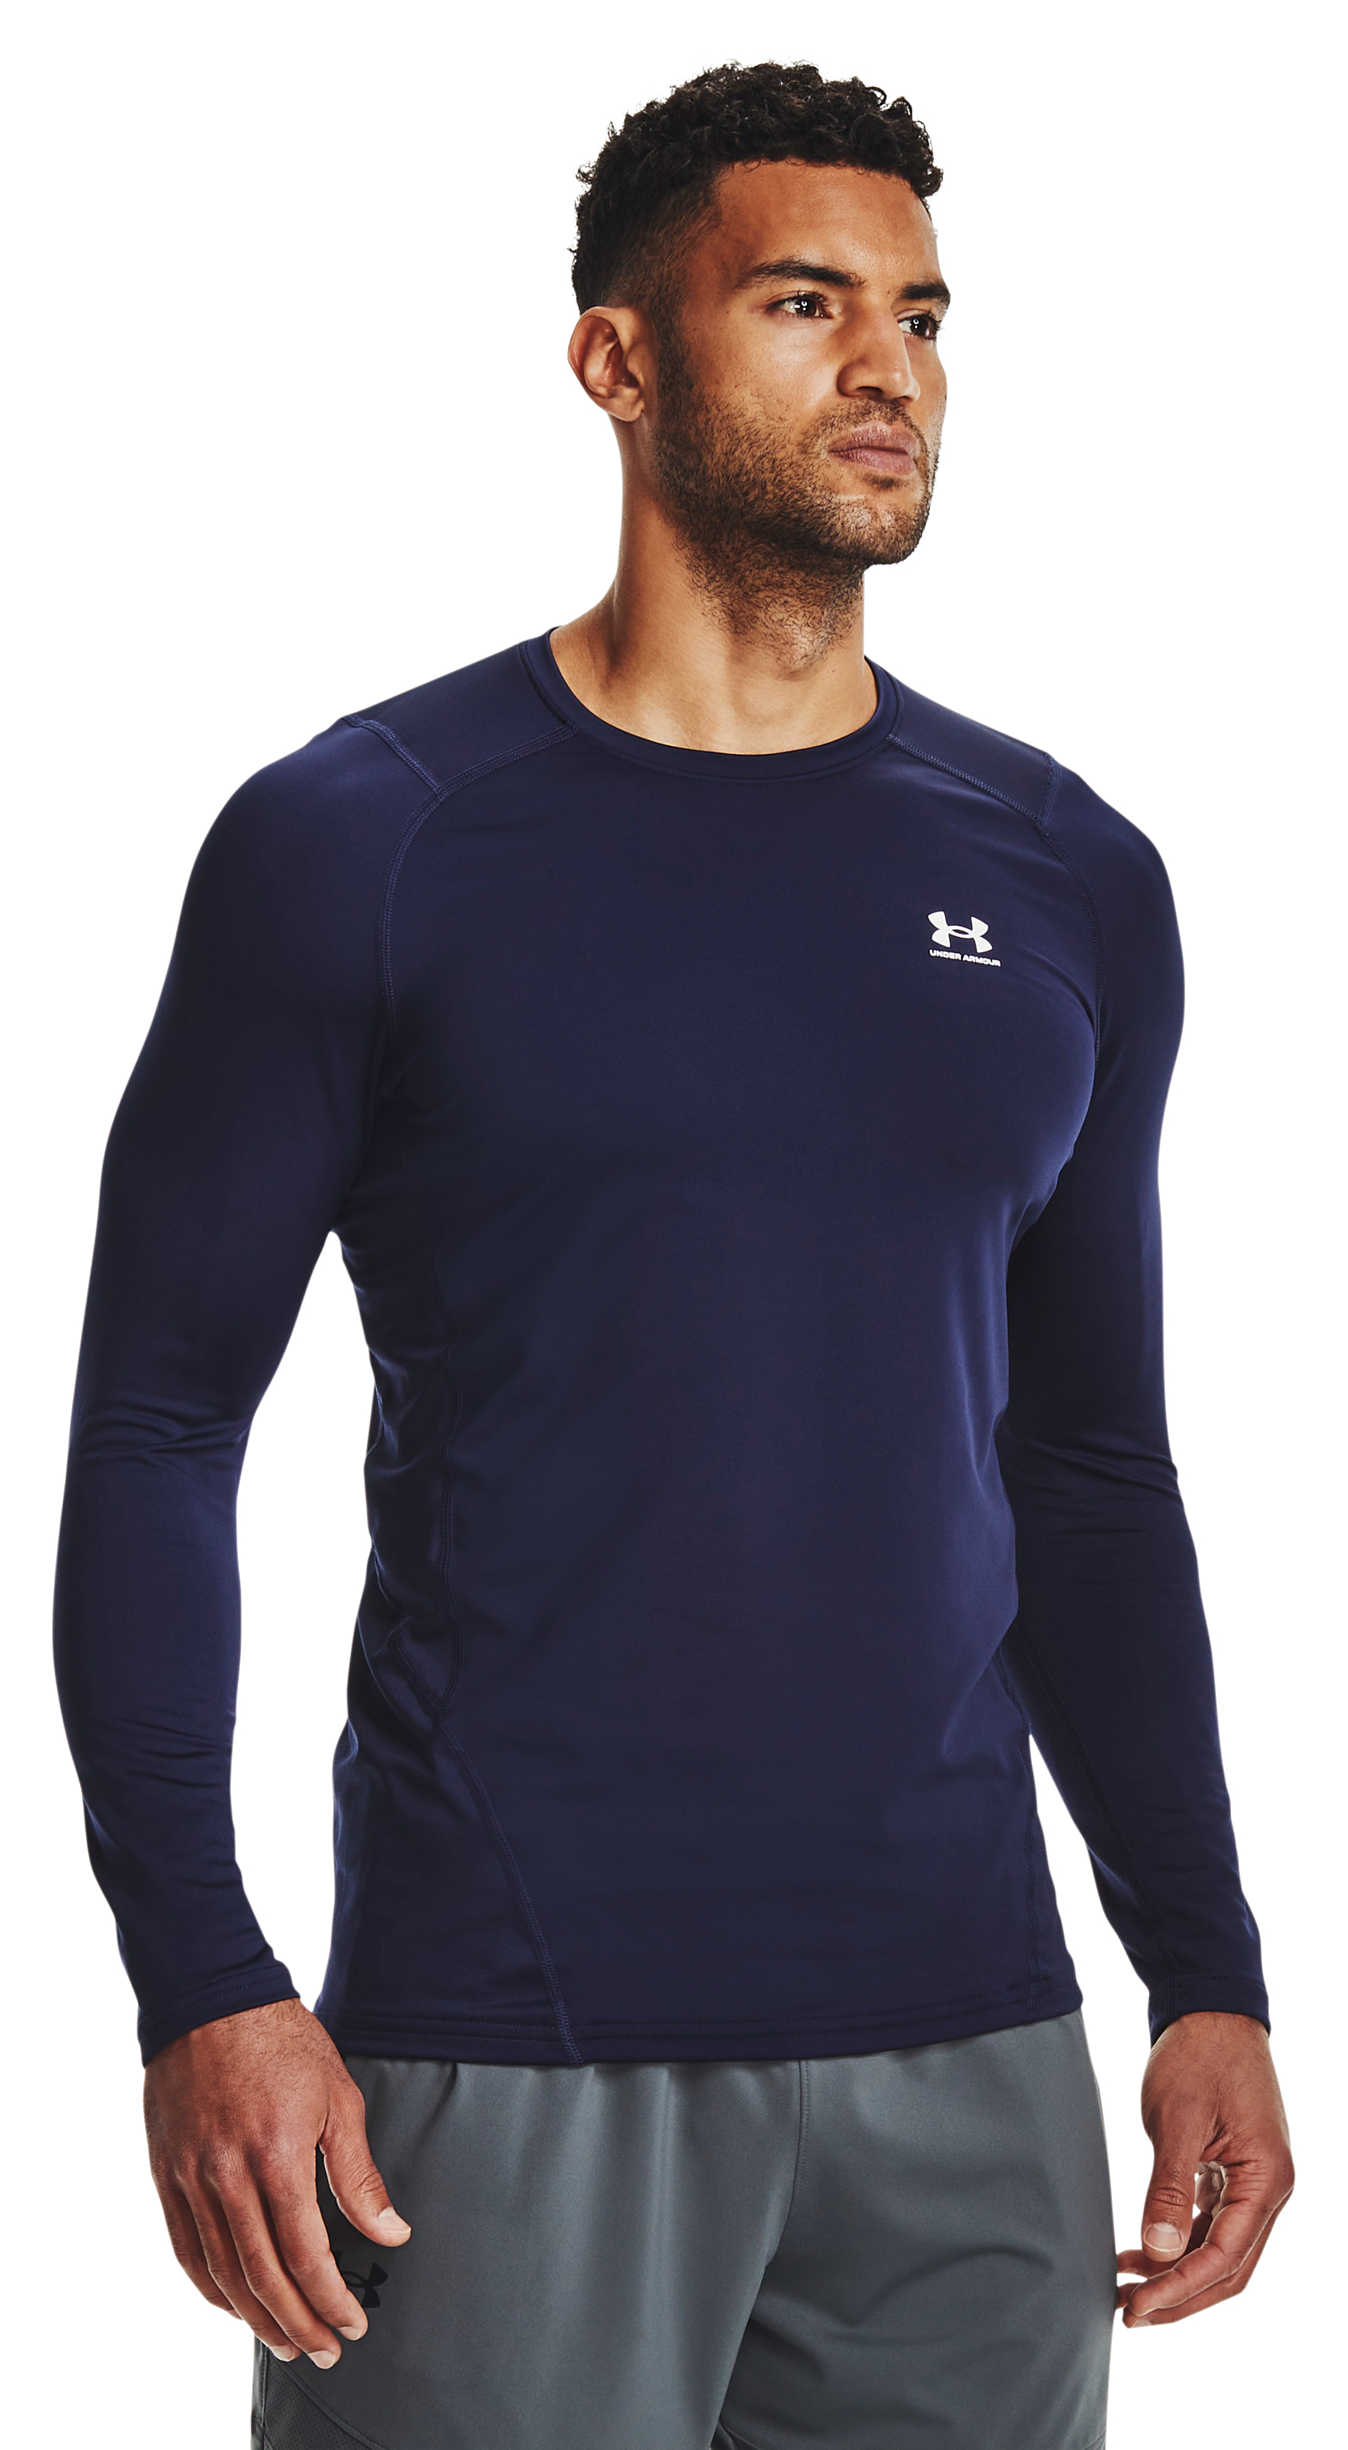 Under Armour ColdGear Fitted Long-Sleeve Crew for Men - Midnight Navy/White - 3XLT